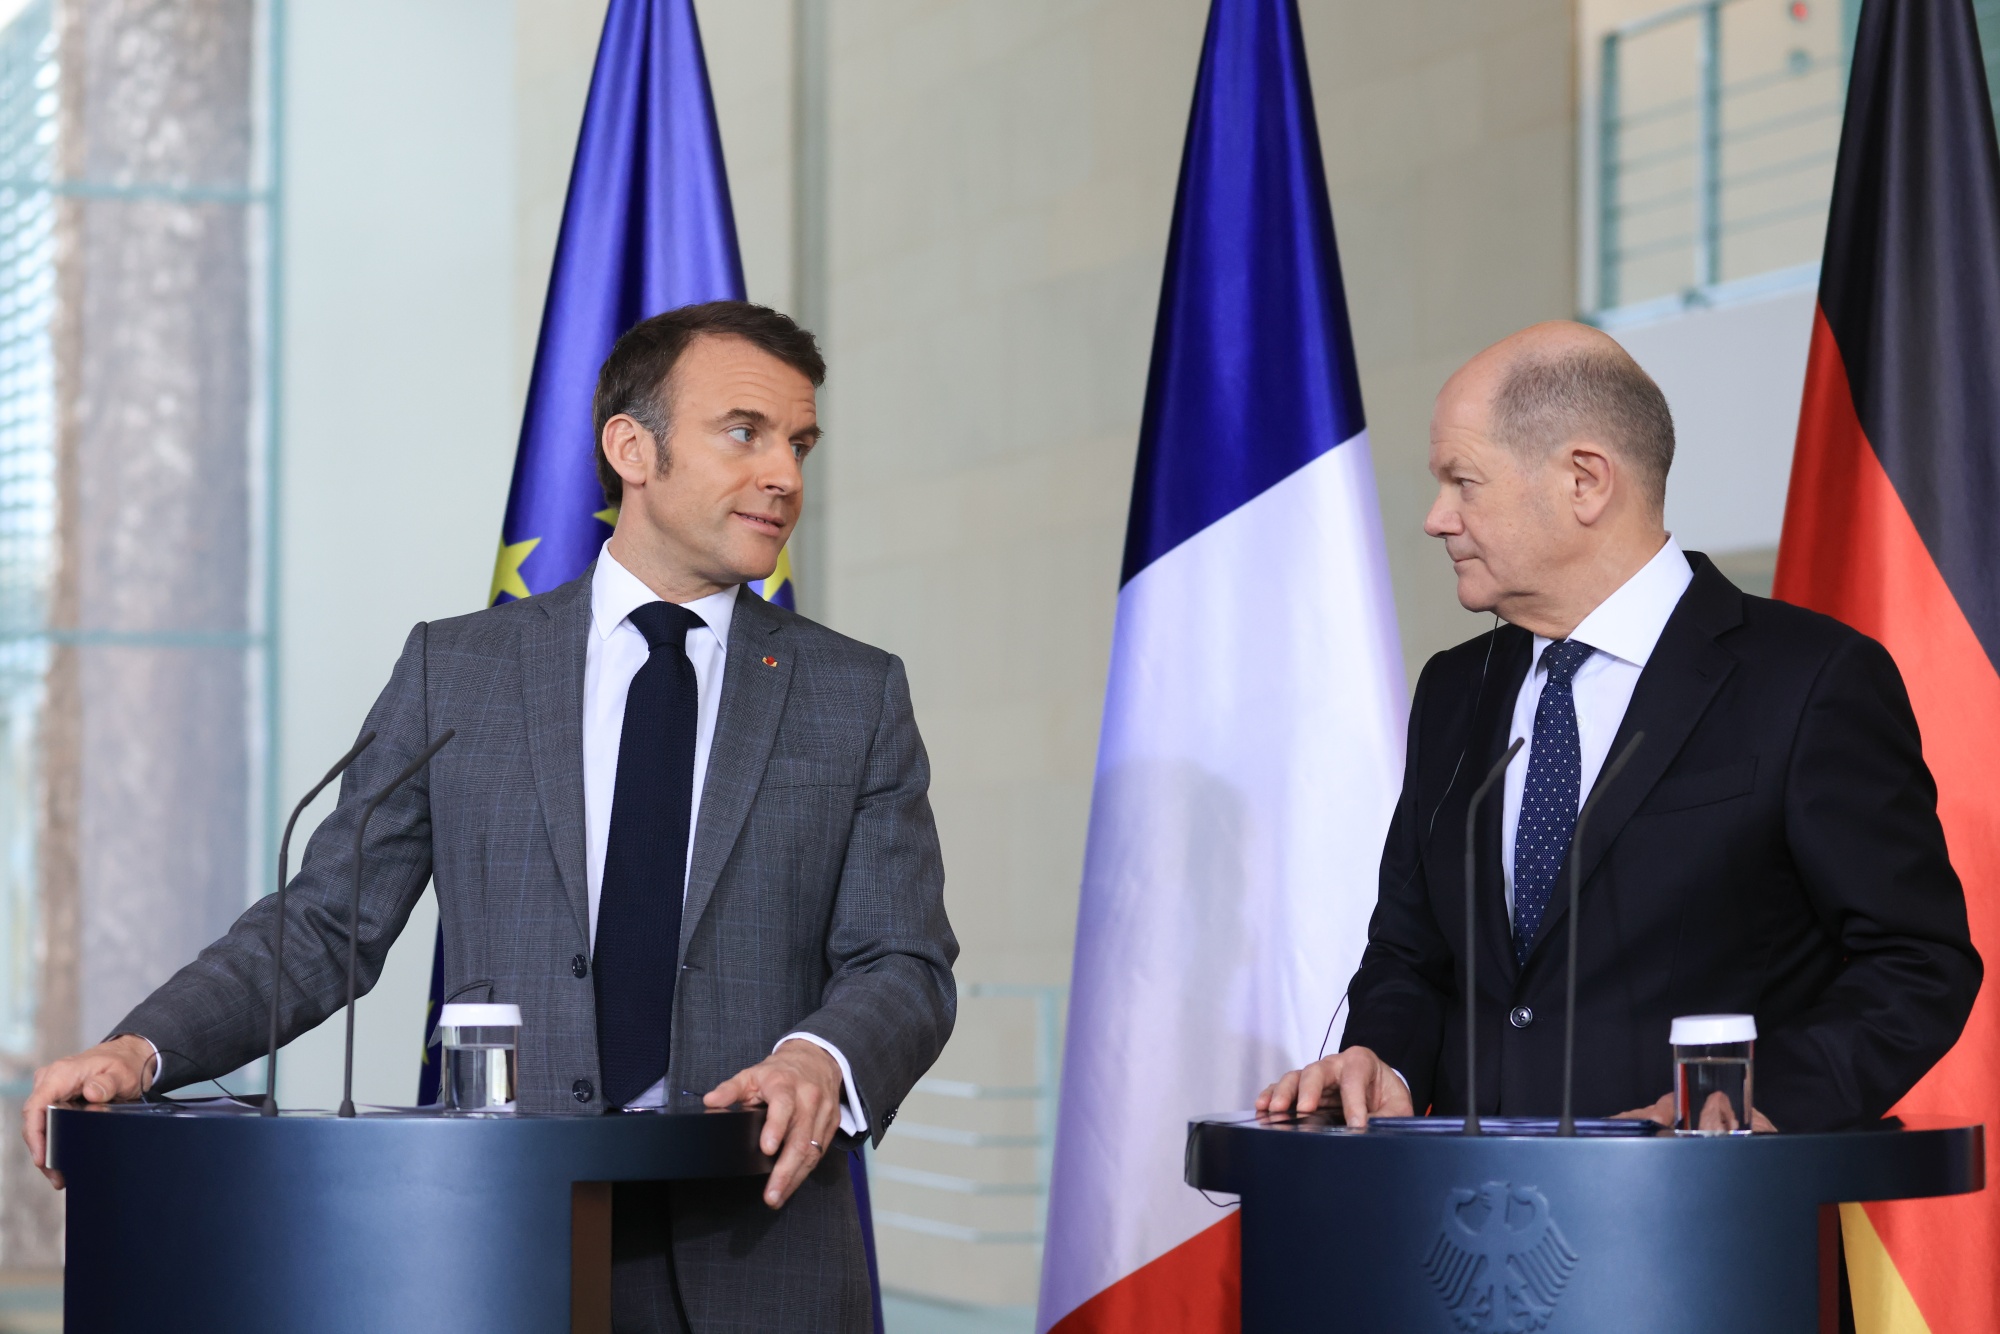 Emmanuel Macron, left, and Olaf Scholz, in Berlin, on March 15.